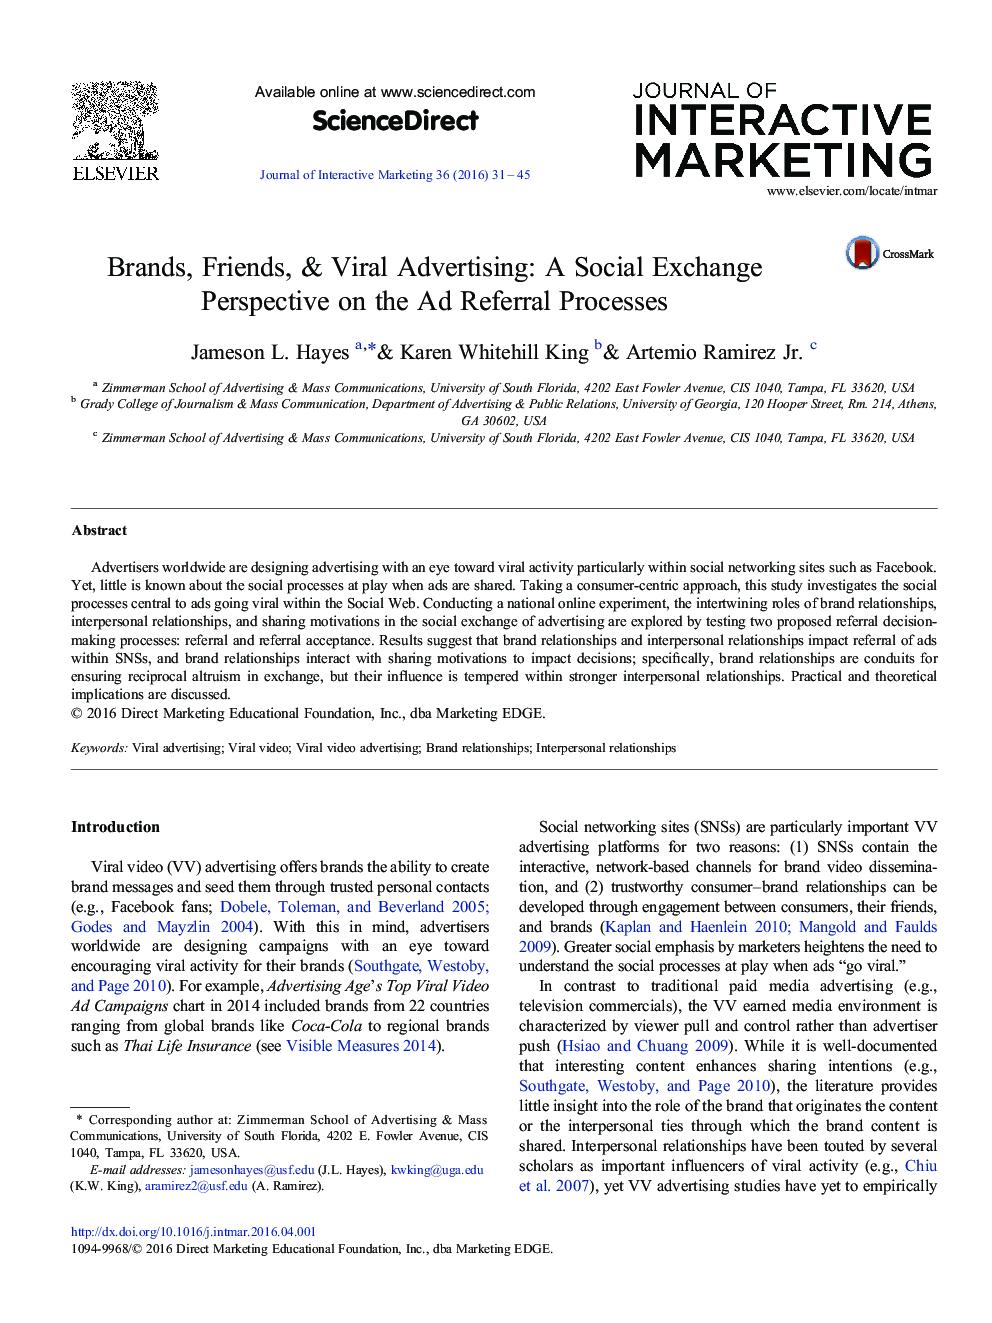 Brands, Friends, & Viral Advertising: A Social Exchange Perspective on the Ad Referral Processes